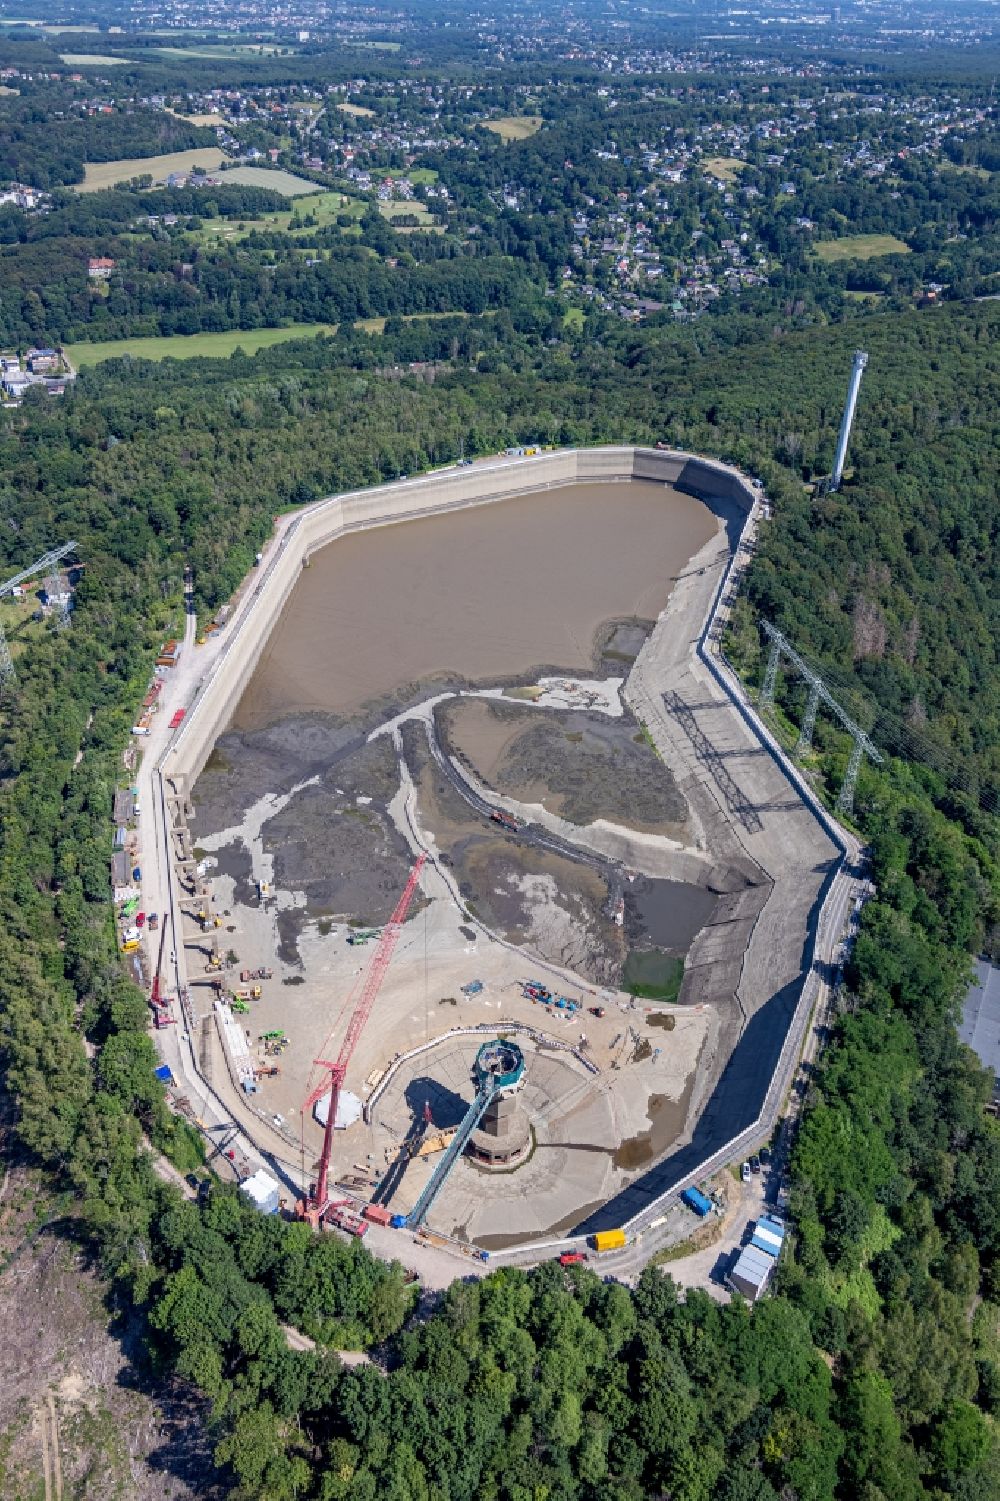 Herdecke from the bird's eye view: Construction site of Pumped storage power plant / hydro power plant with energy storage on Hengsteysee in Herdecke in North Rhine-Westphalia